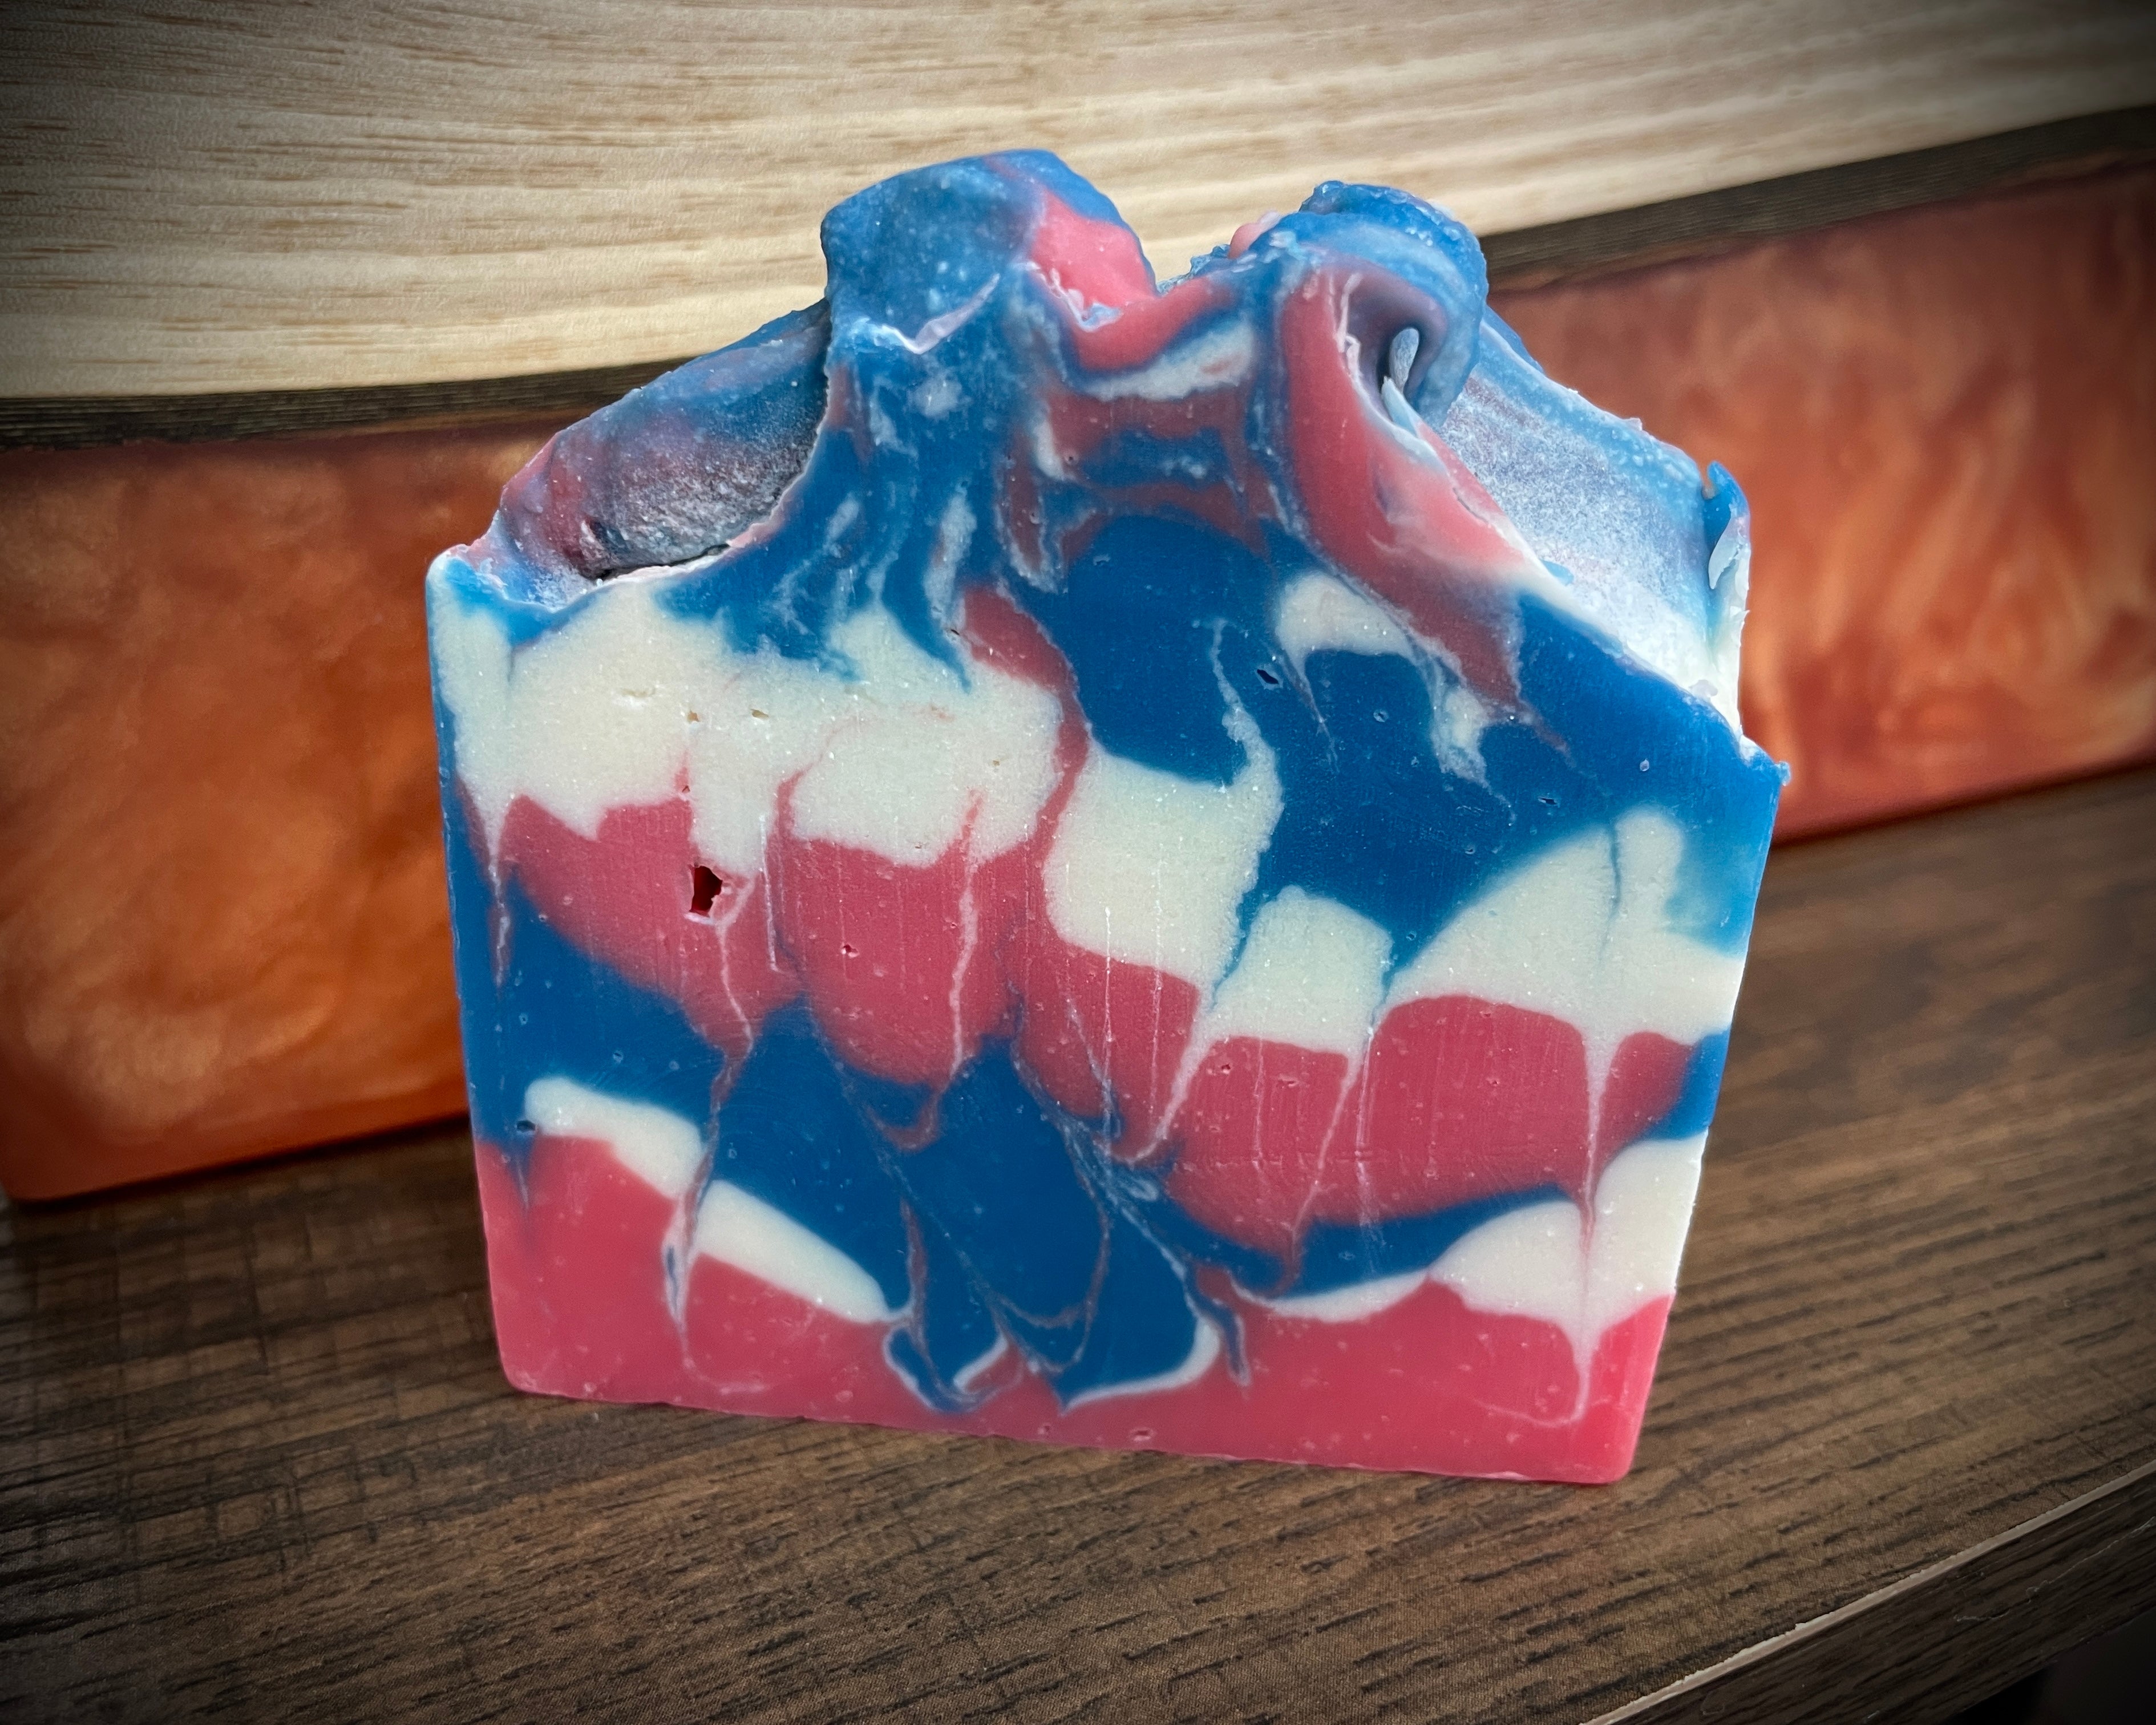 Shave and a Haircut Handmade Soap